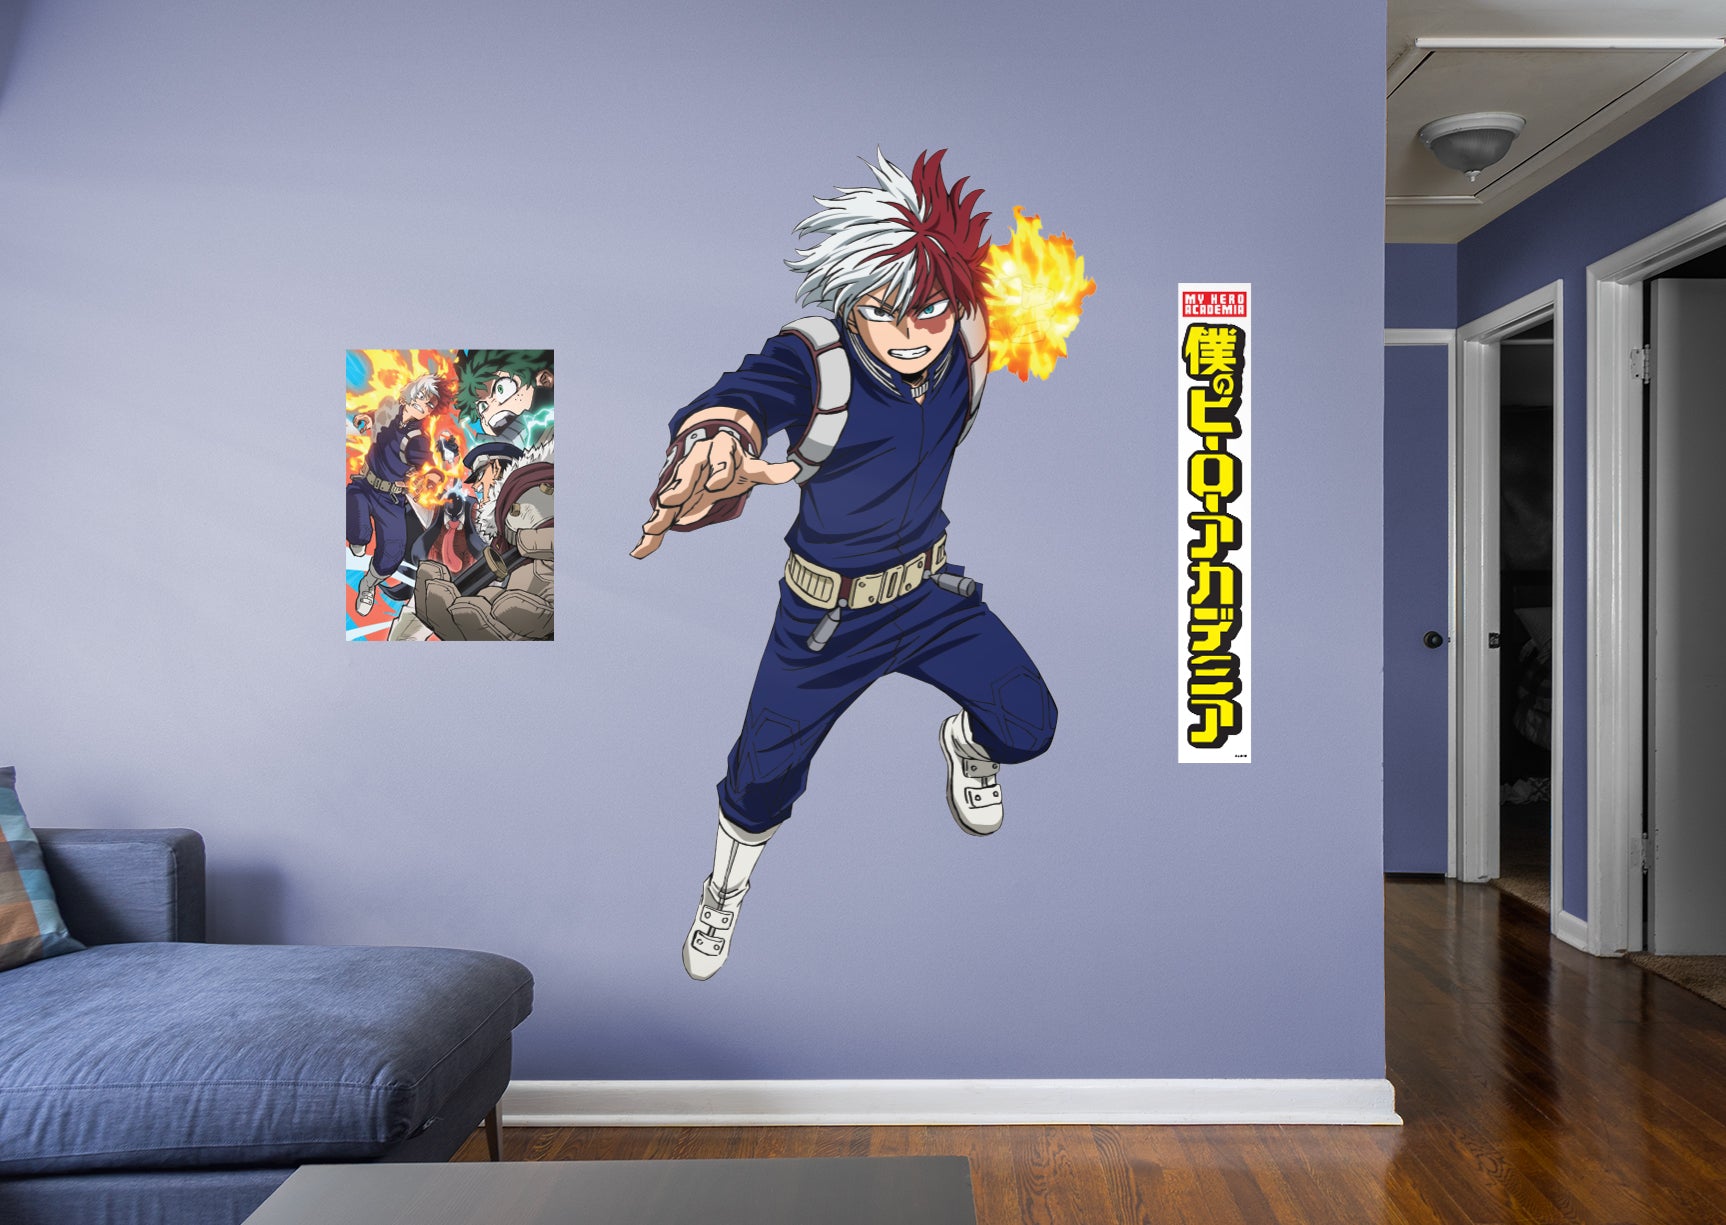 Pin on Anime Wall Decals